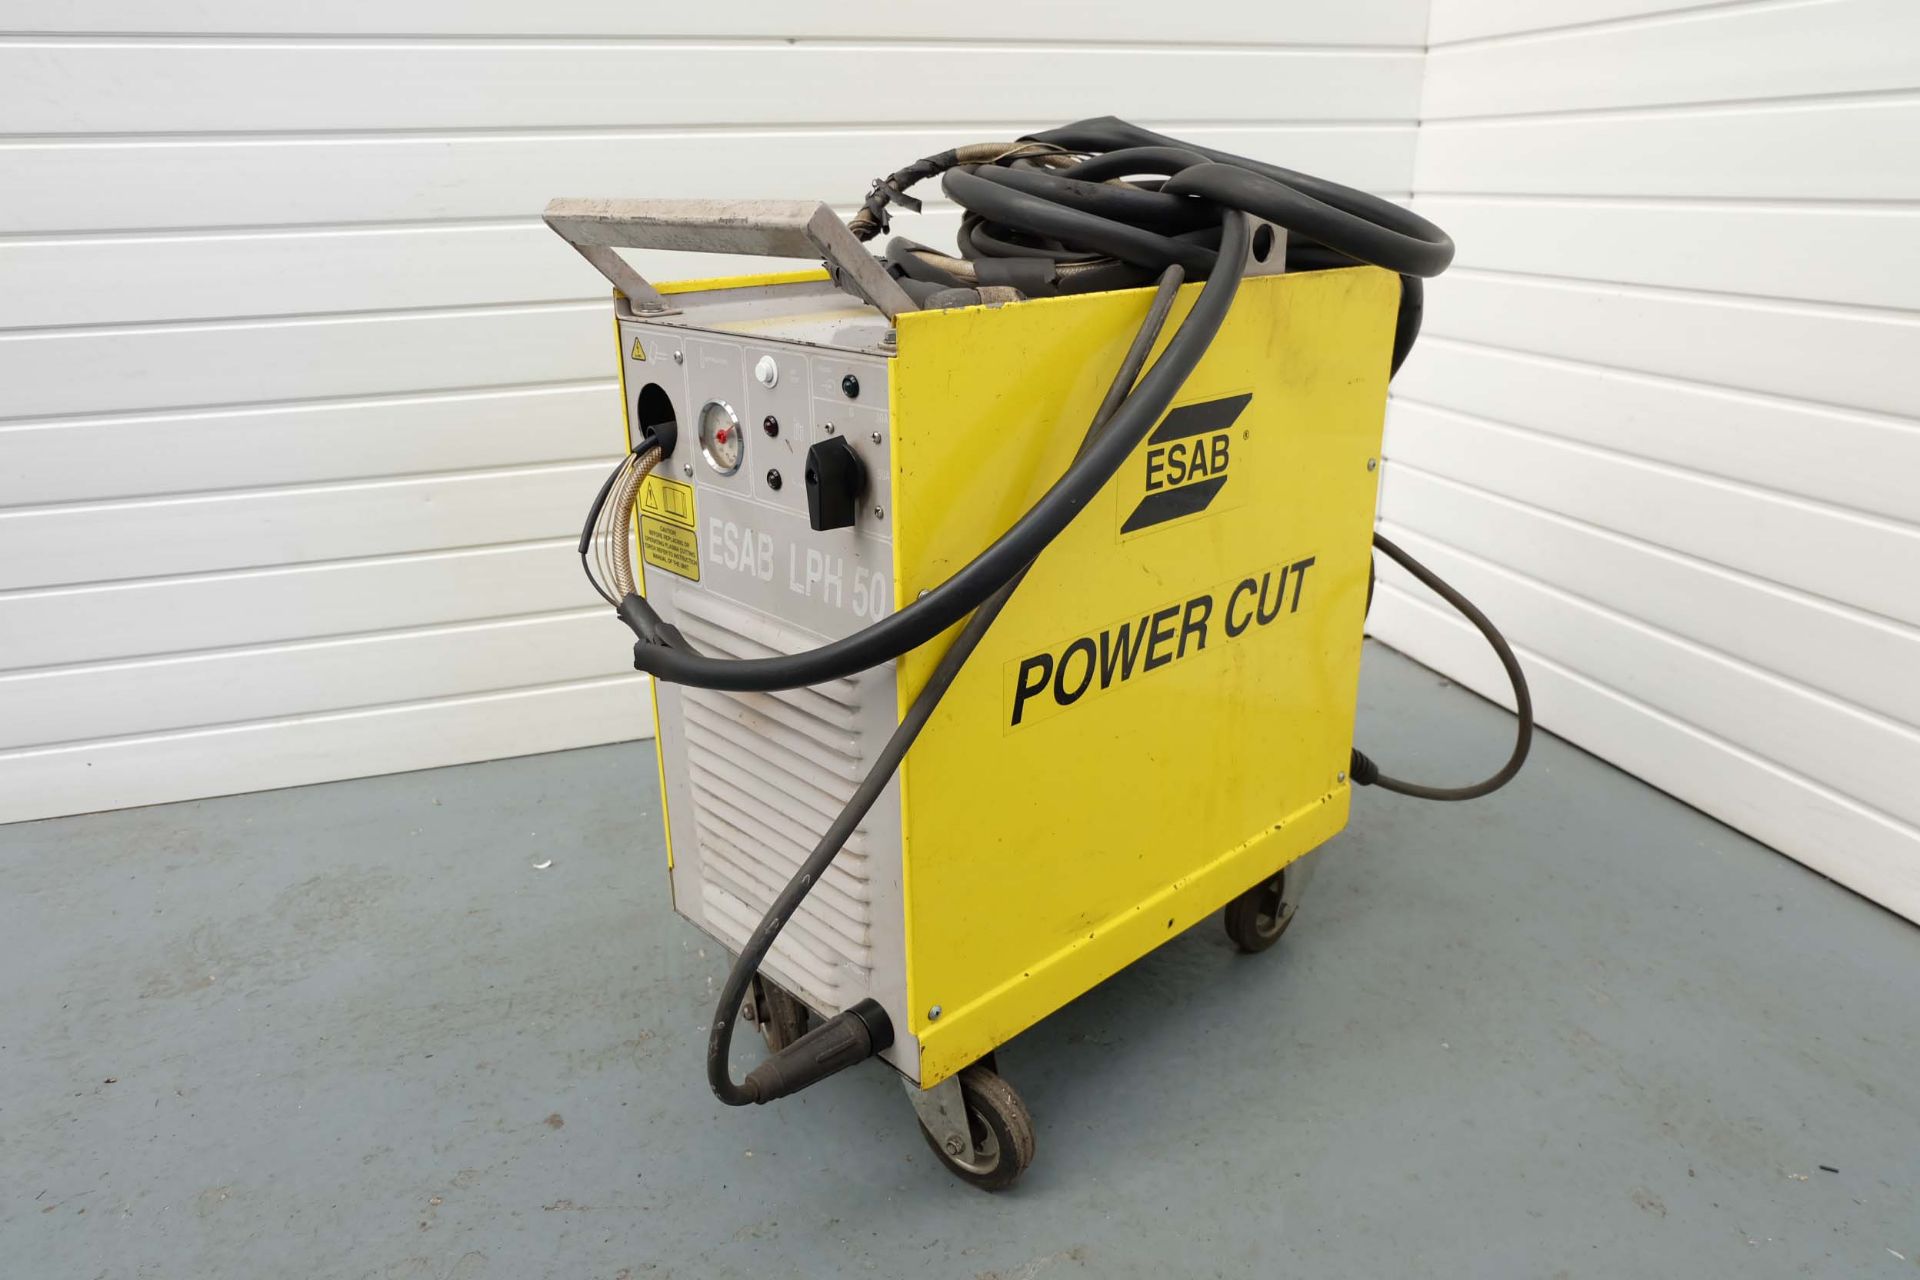 ESAB LPH 50 Mobile Mig Welding Set. 50 Amp @ 60% Duty Cycle. 30 Amp @ 100% Duty Cycle.